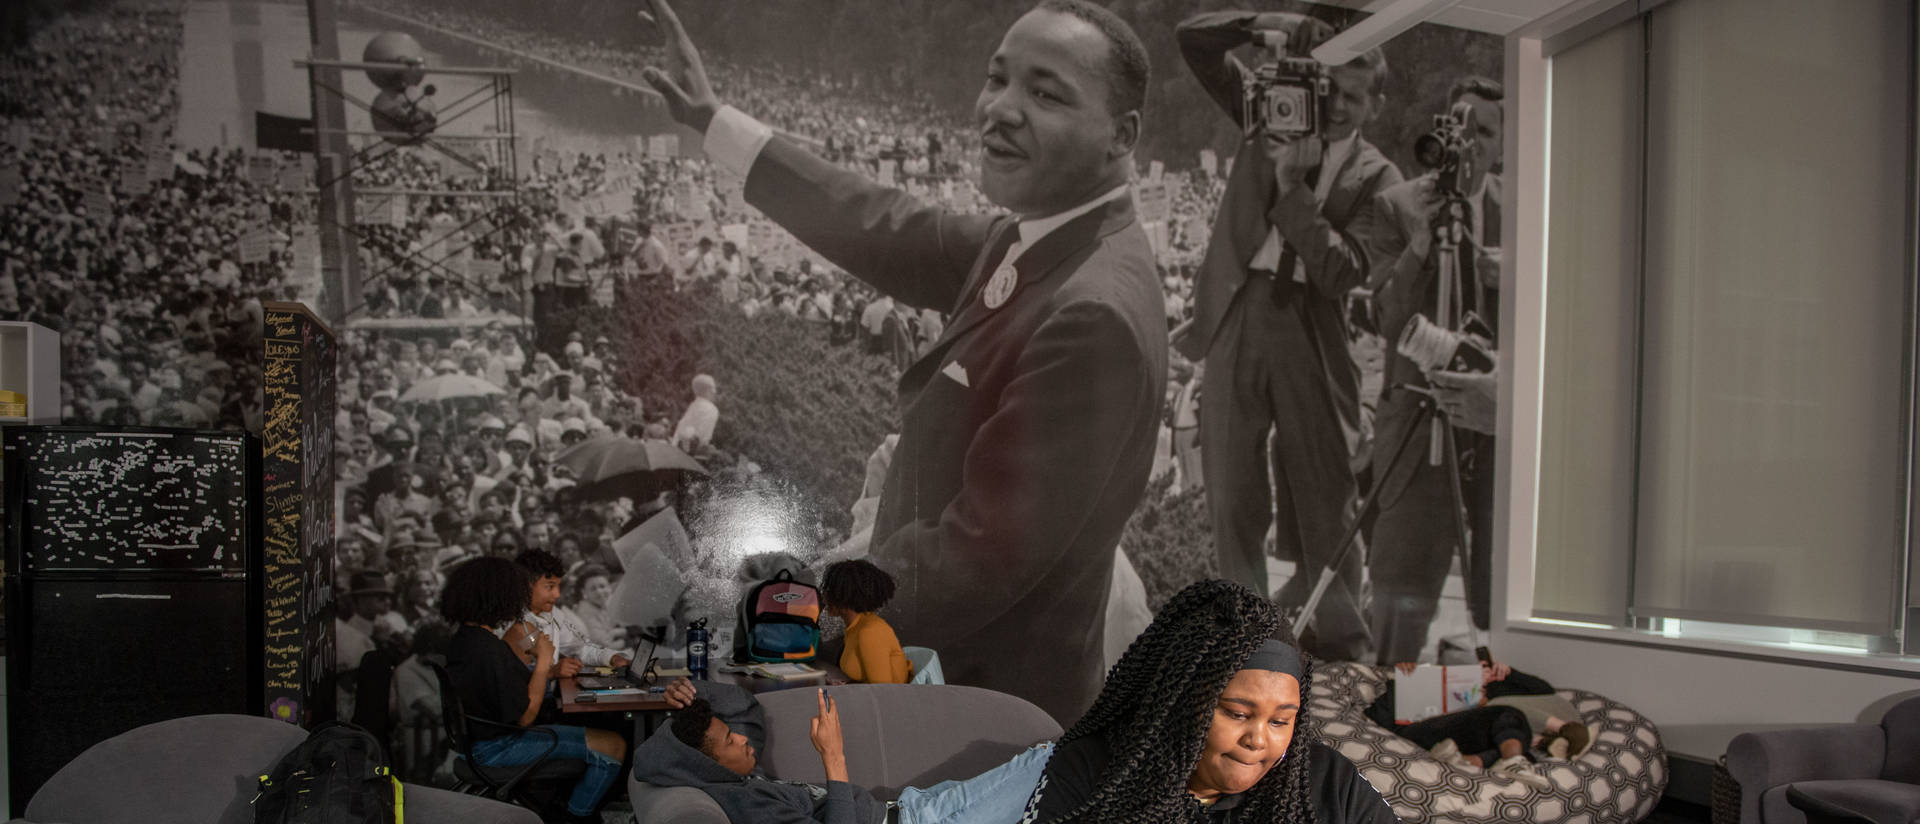 Student sitting at laptop in UWEC Black Cultural Center, MLK mural on the wall